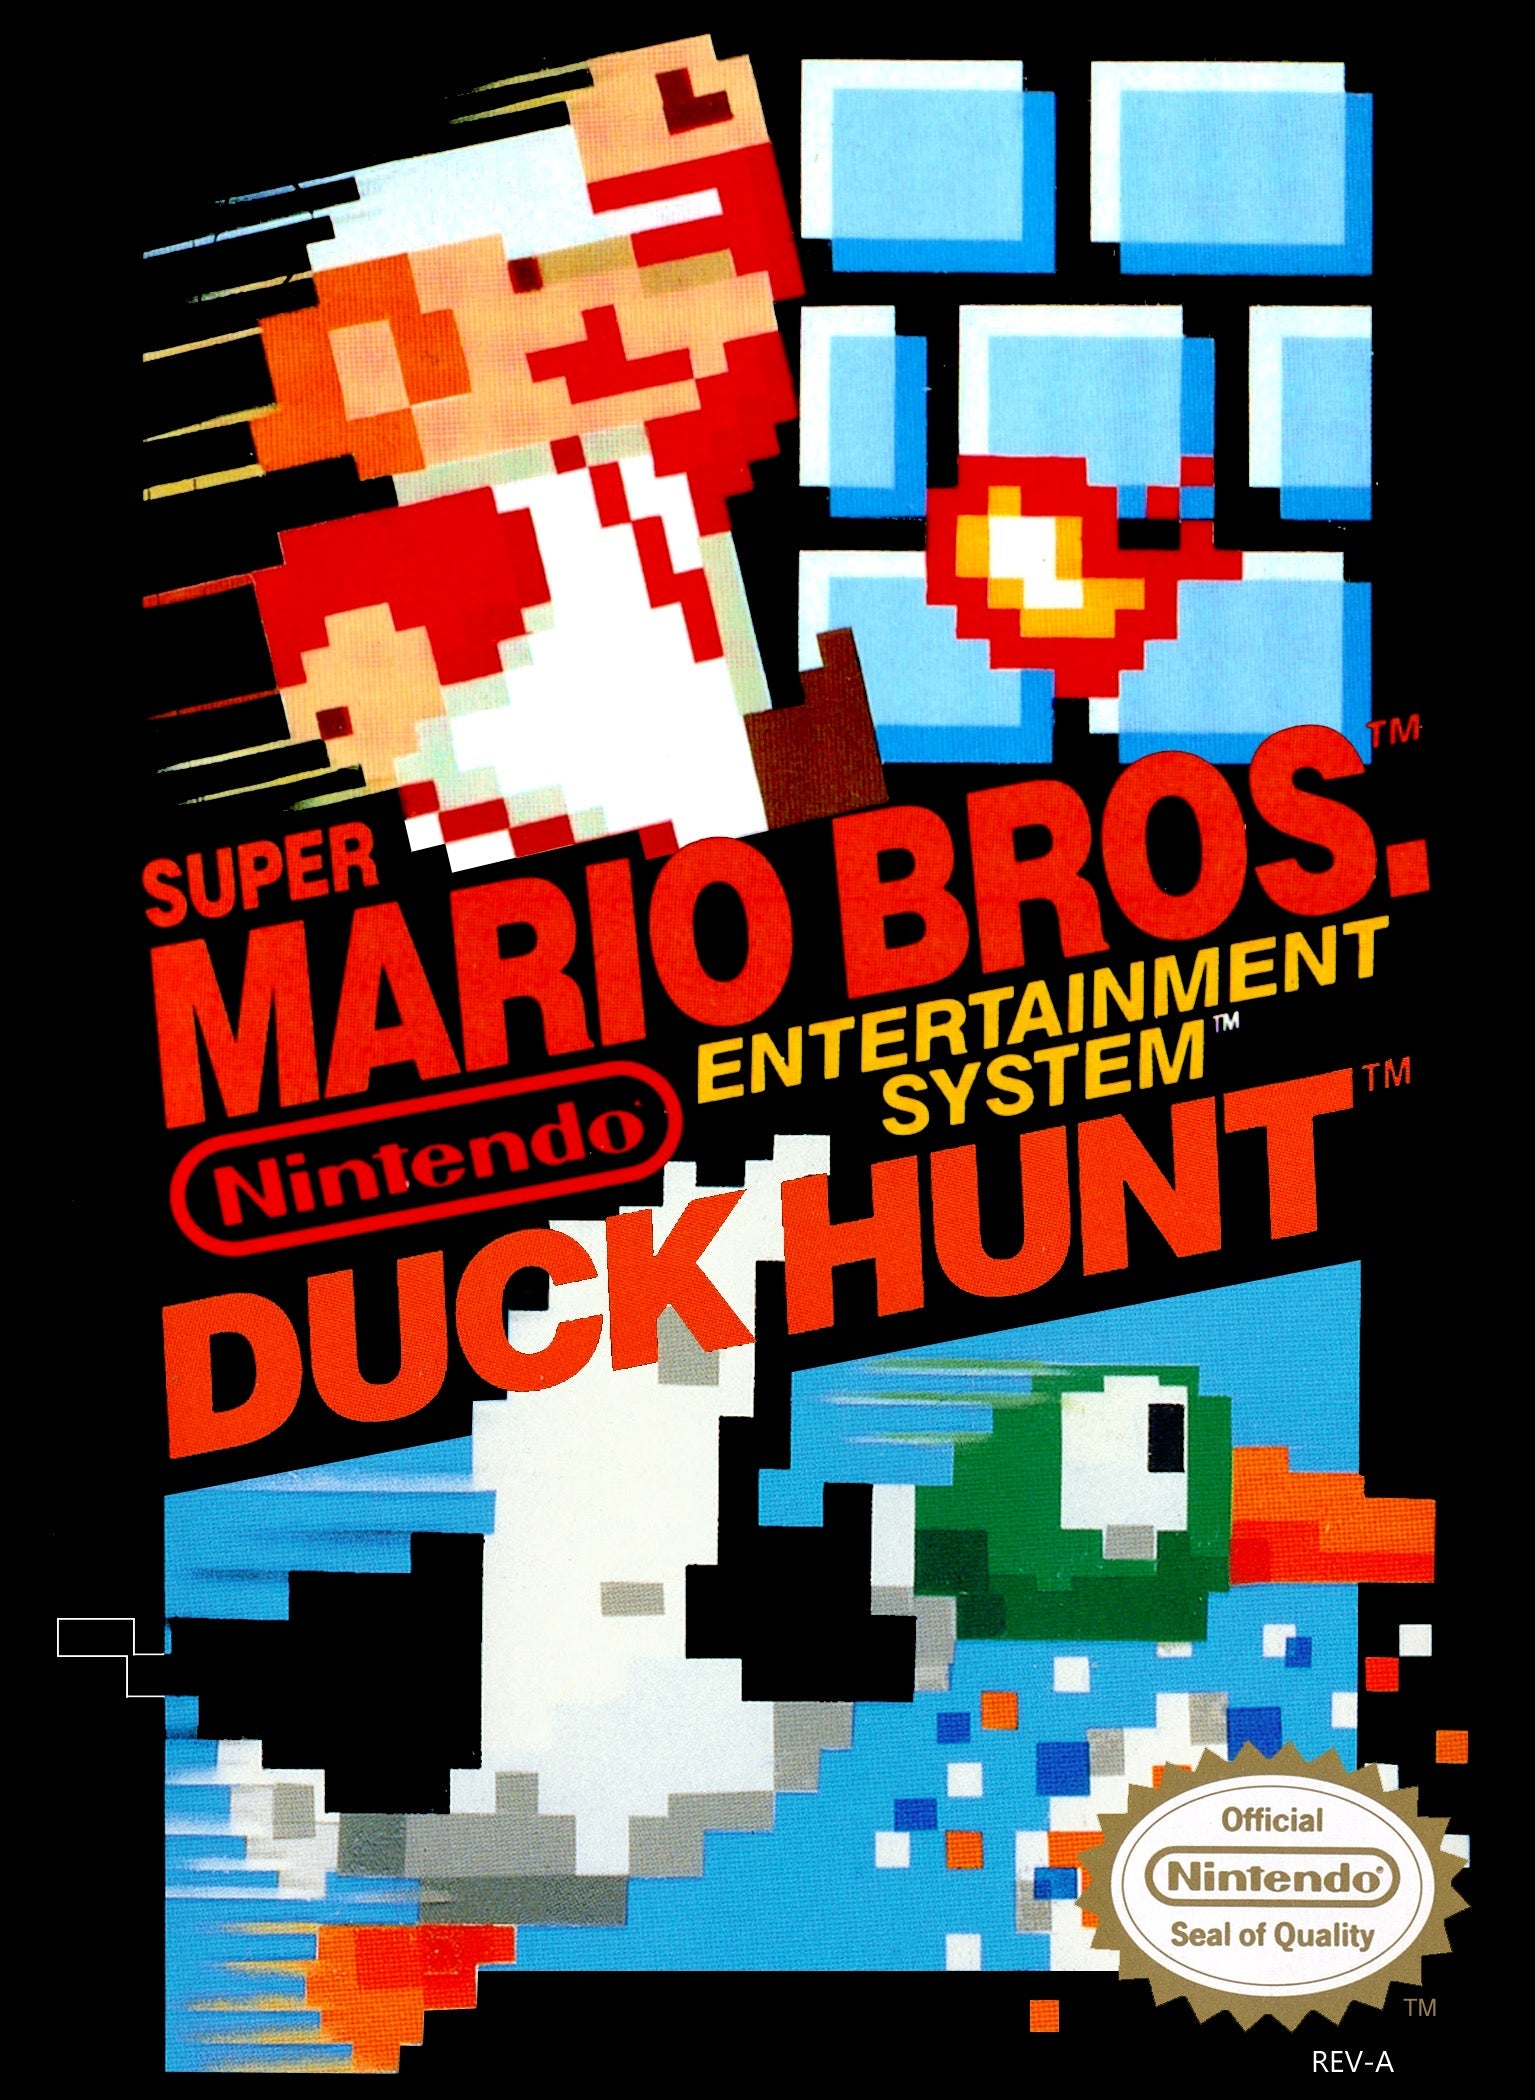 Super Mario Bros. and Duck Hunt Cover Art and Product Photo